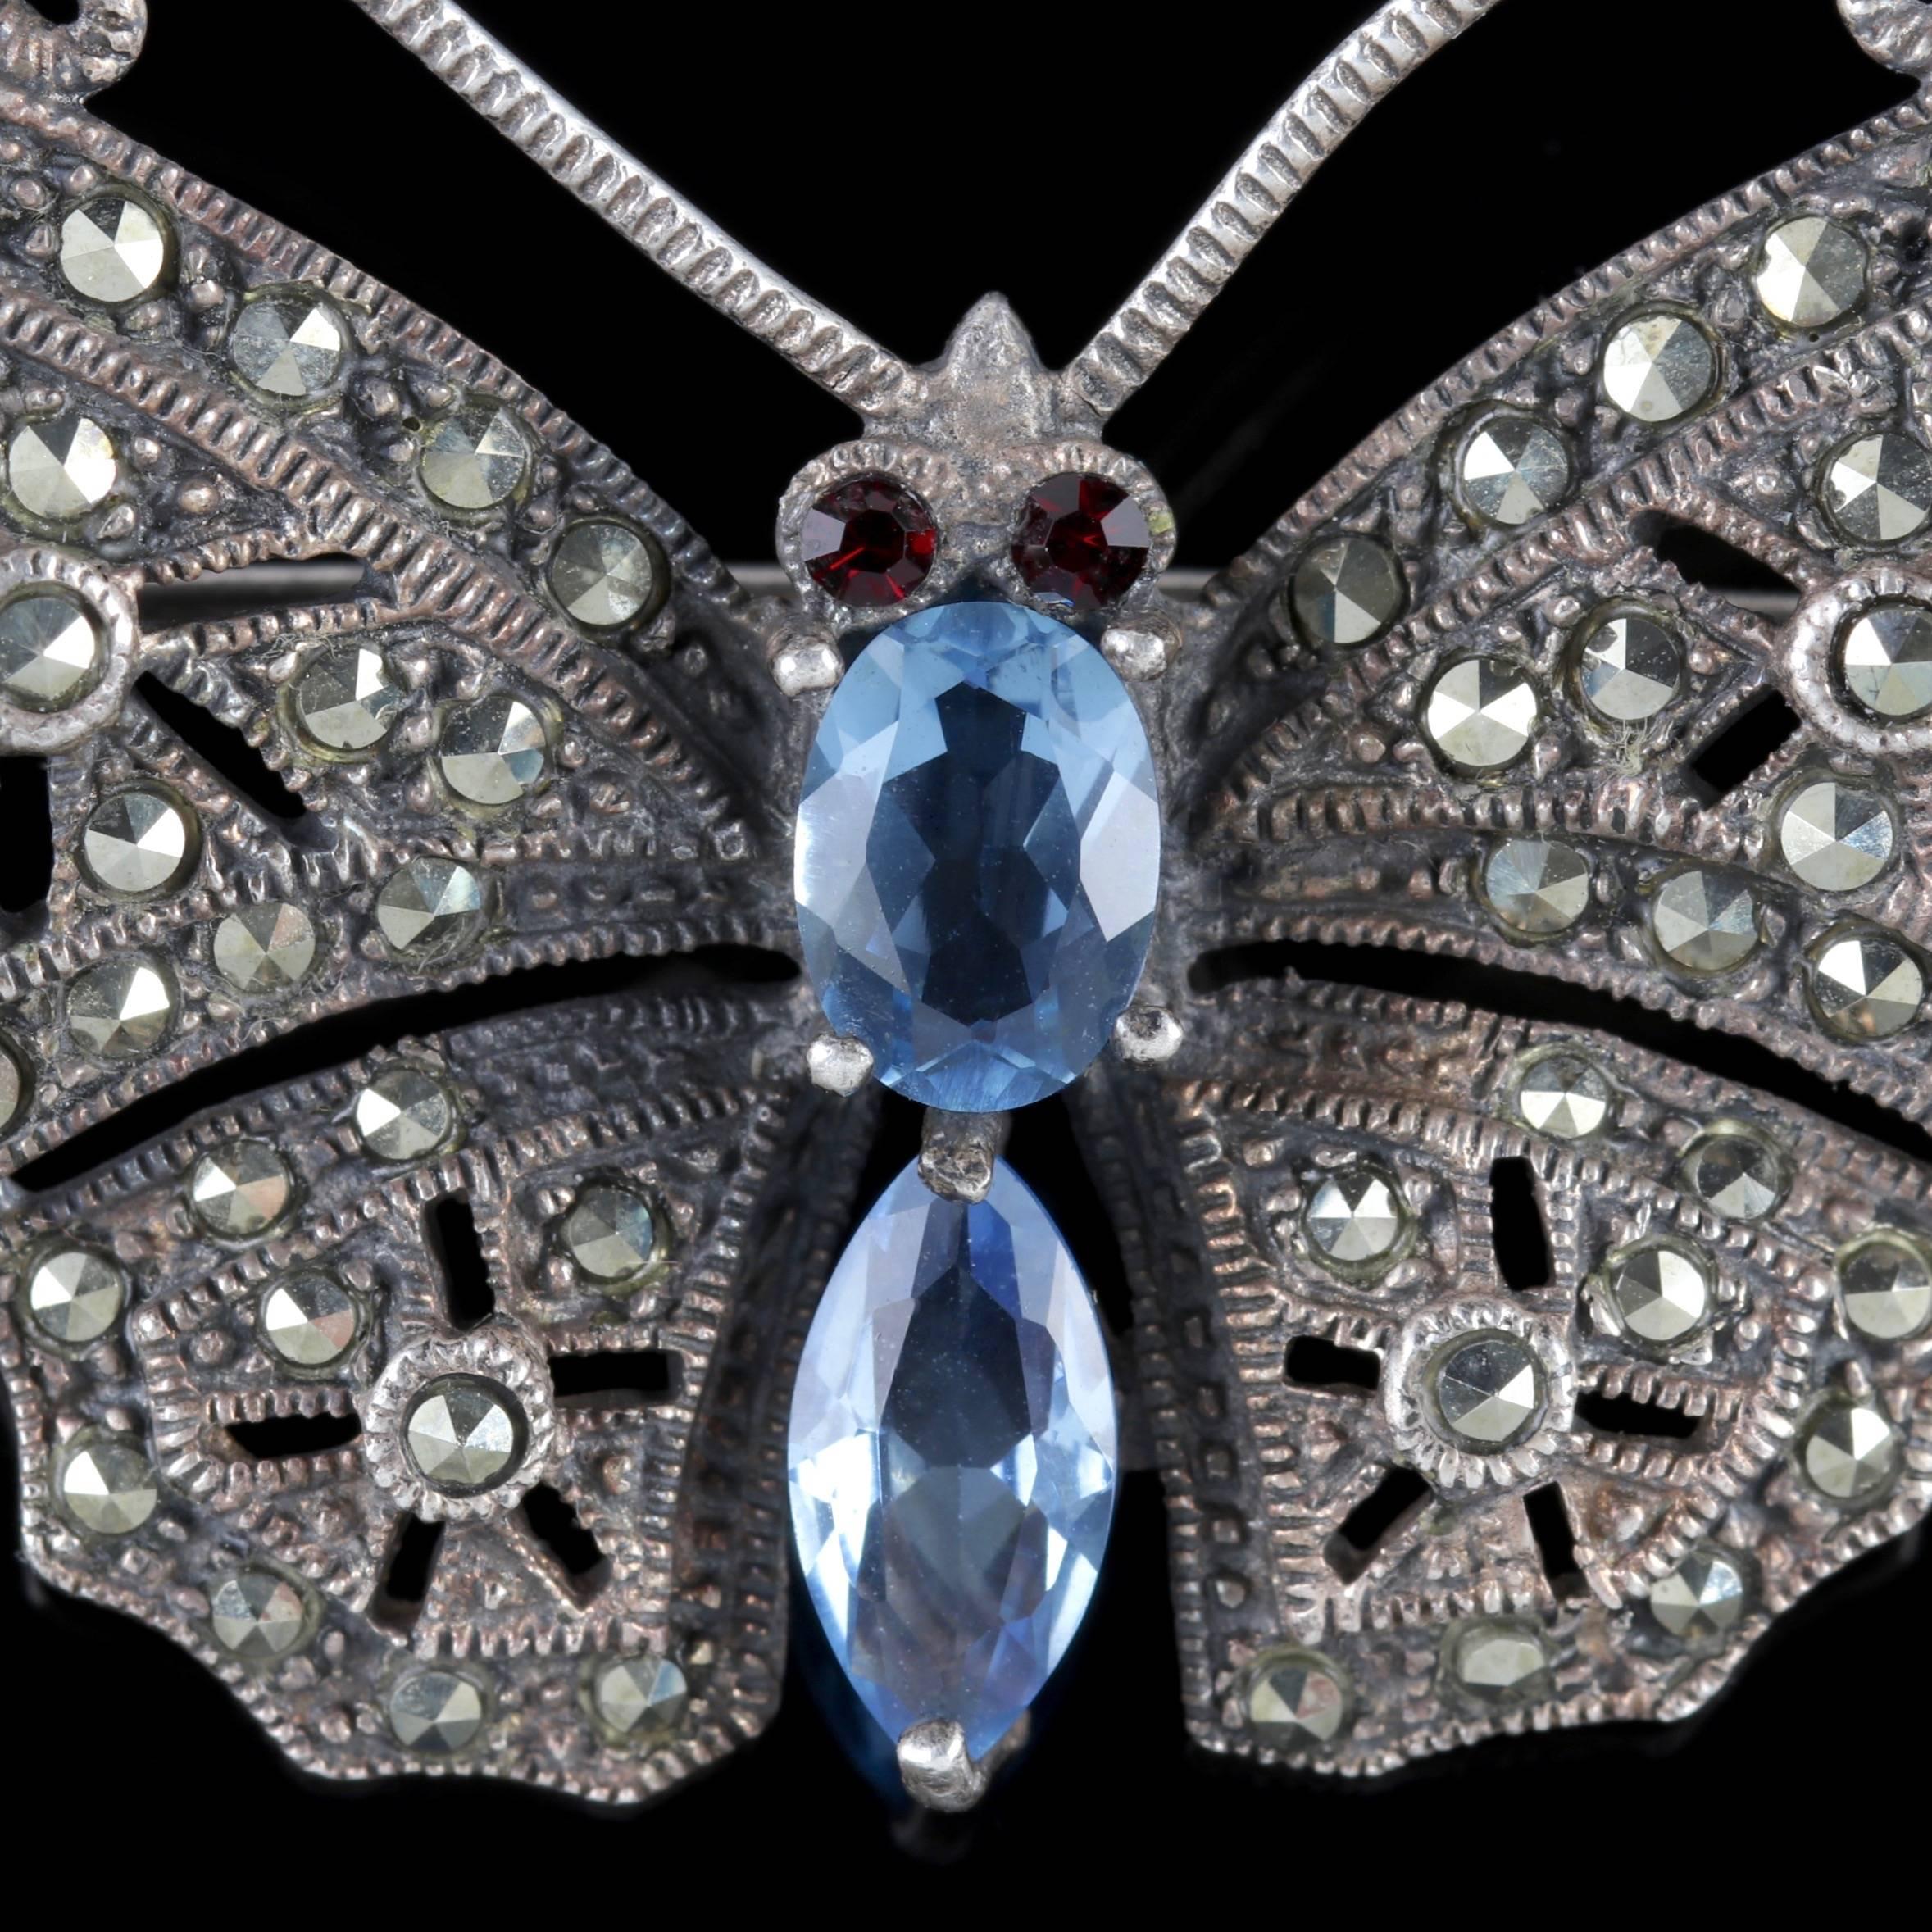 To read more please click continue reading below-

This wonderful antique Victorian Silver Butterfly brooch is Circa 1900. 

Butterfly or insect jewellery today is highly collectable and was a symbol of good luck to the wearer during the Victorian